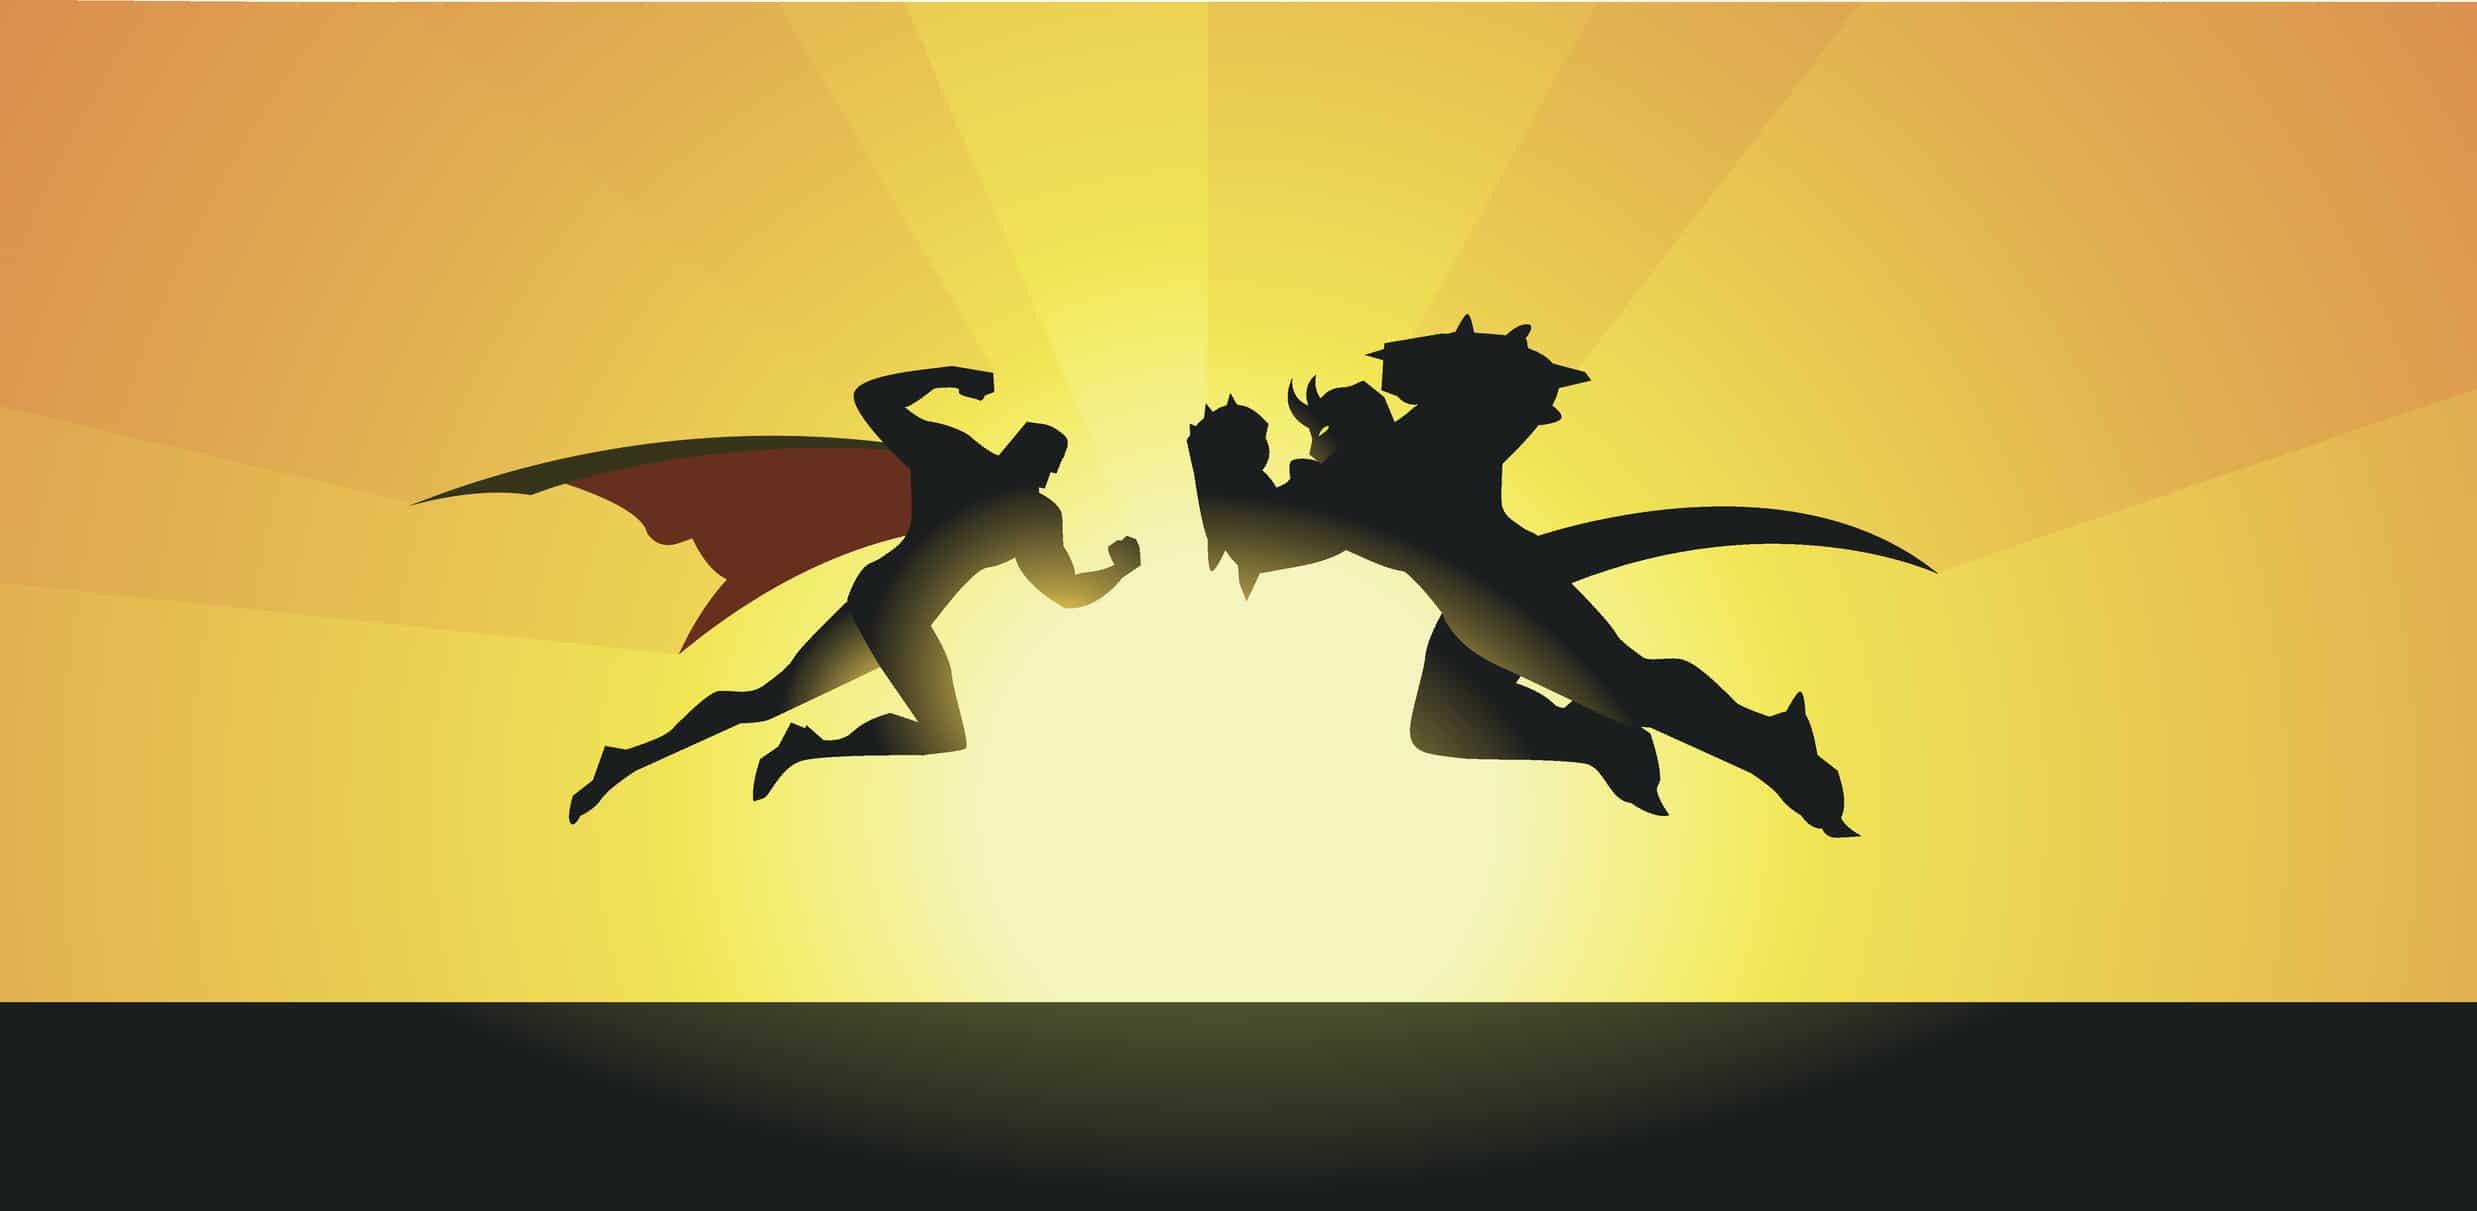 How to Make Hero-Villain Brand Stories Drive Conversions